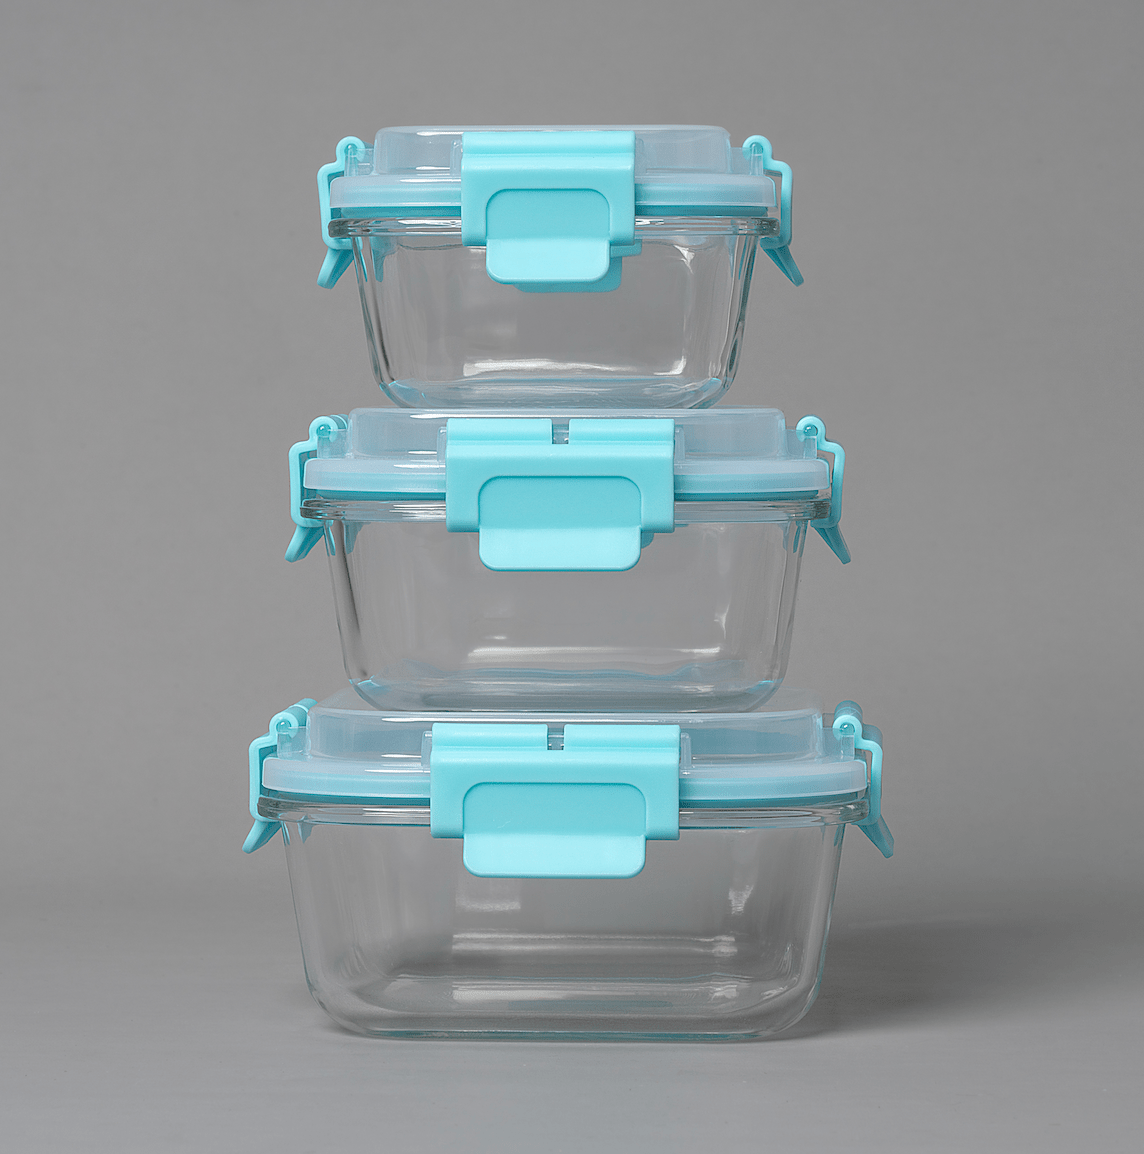 HI-TOP Lids With Pro Grade Removable Lockdown Levers (Square 3 container set) - GenicookGenicook